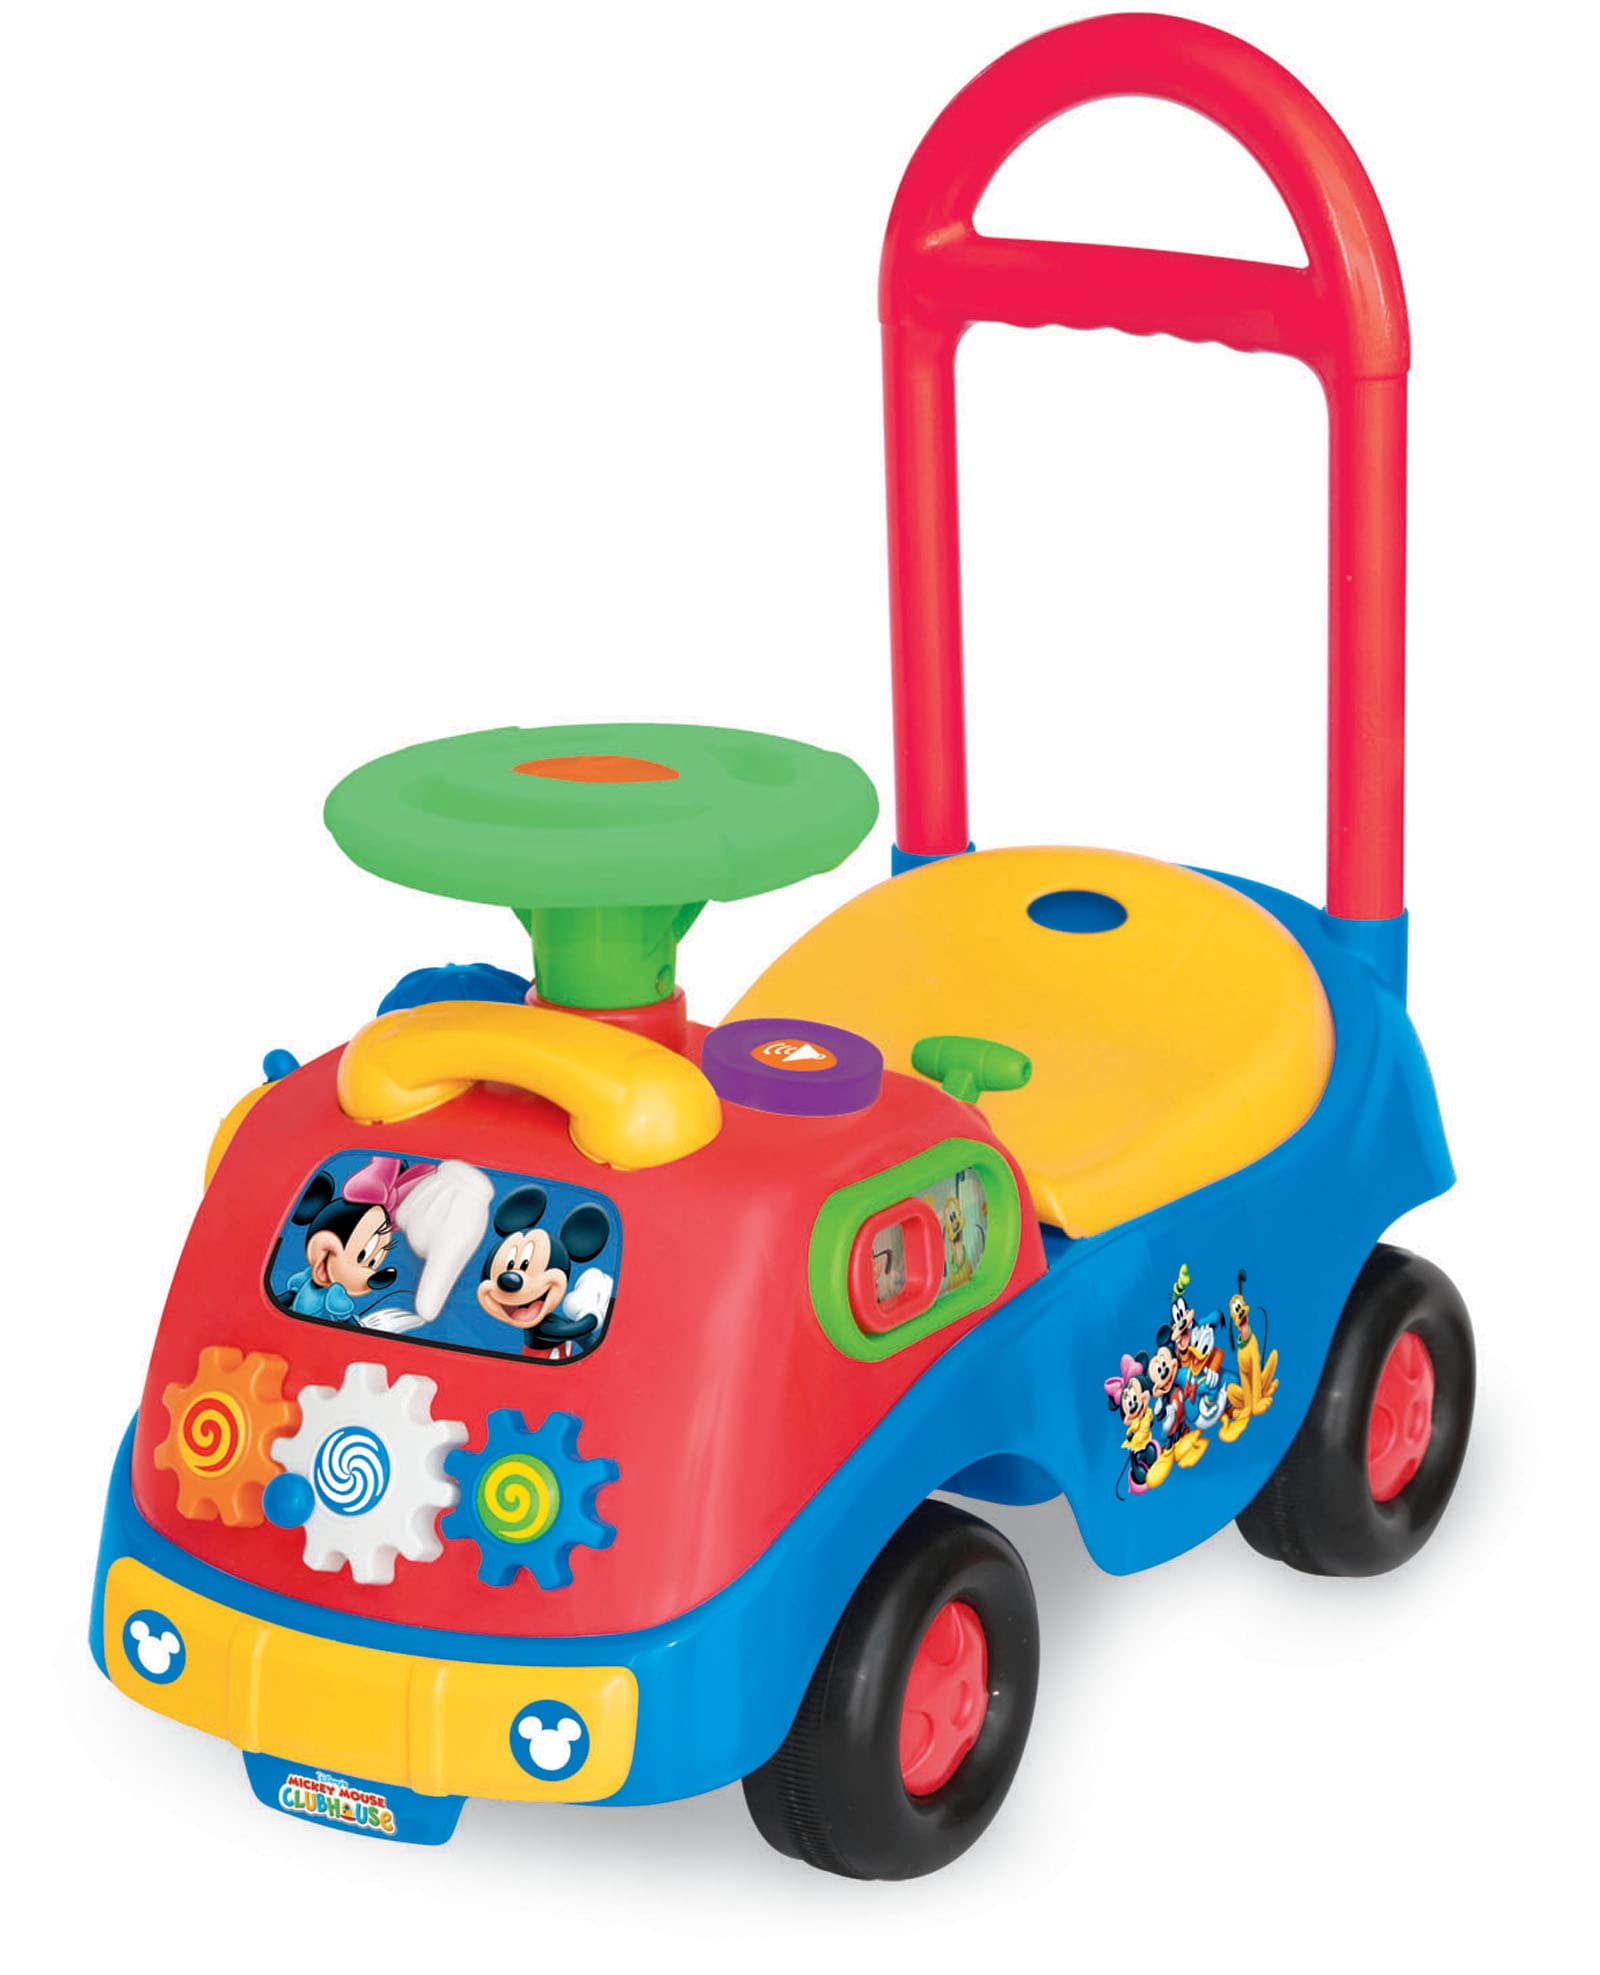 Disney Junior Mickey Mouse Clubhouse Mickey Playtime Room Transformation Kit